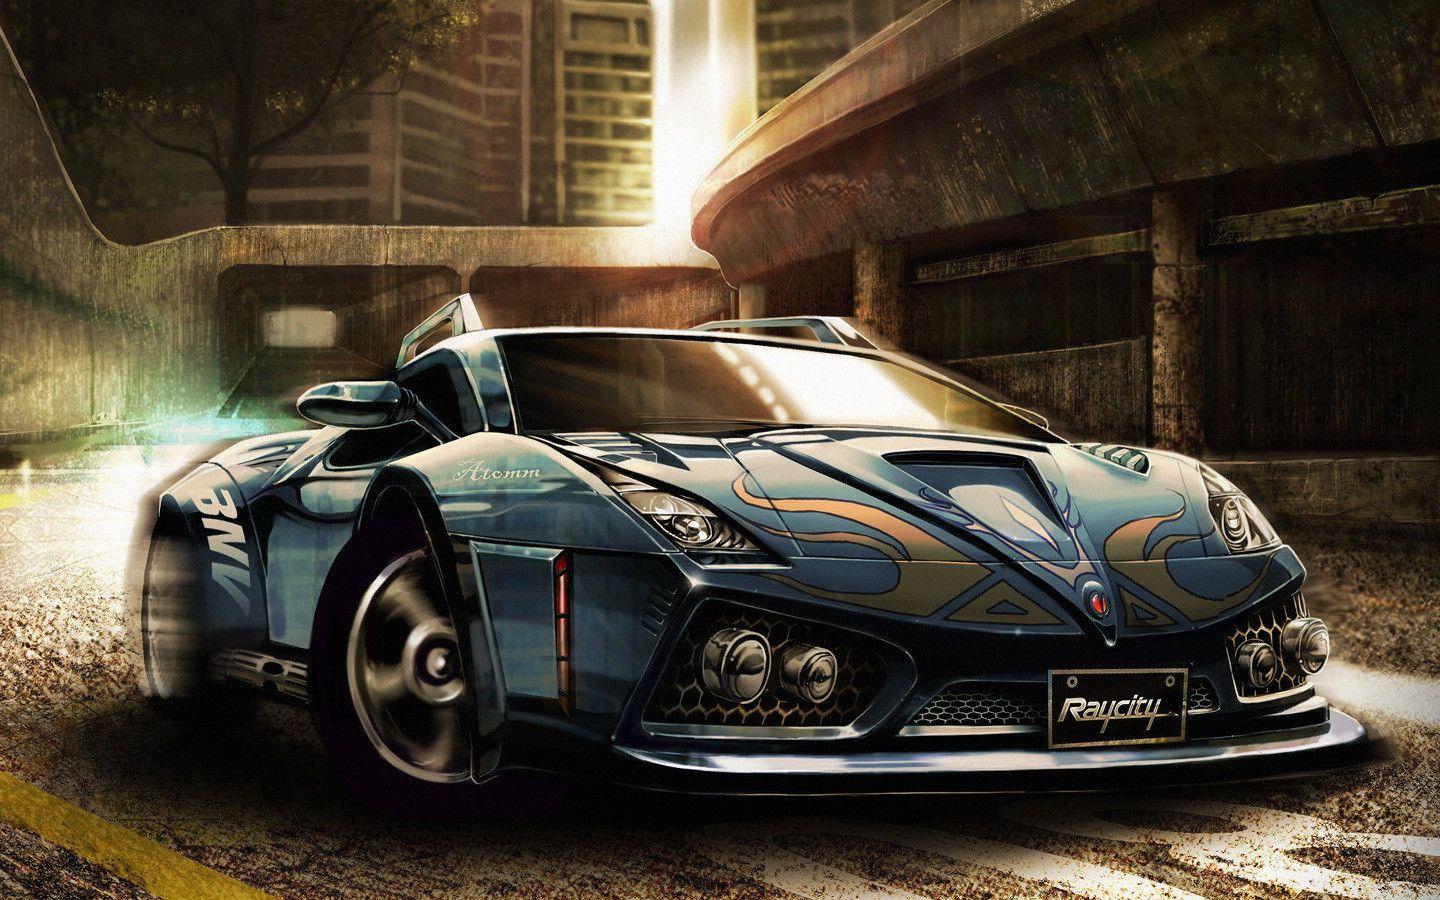 cool car wallpapers 1920x1080